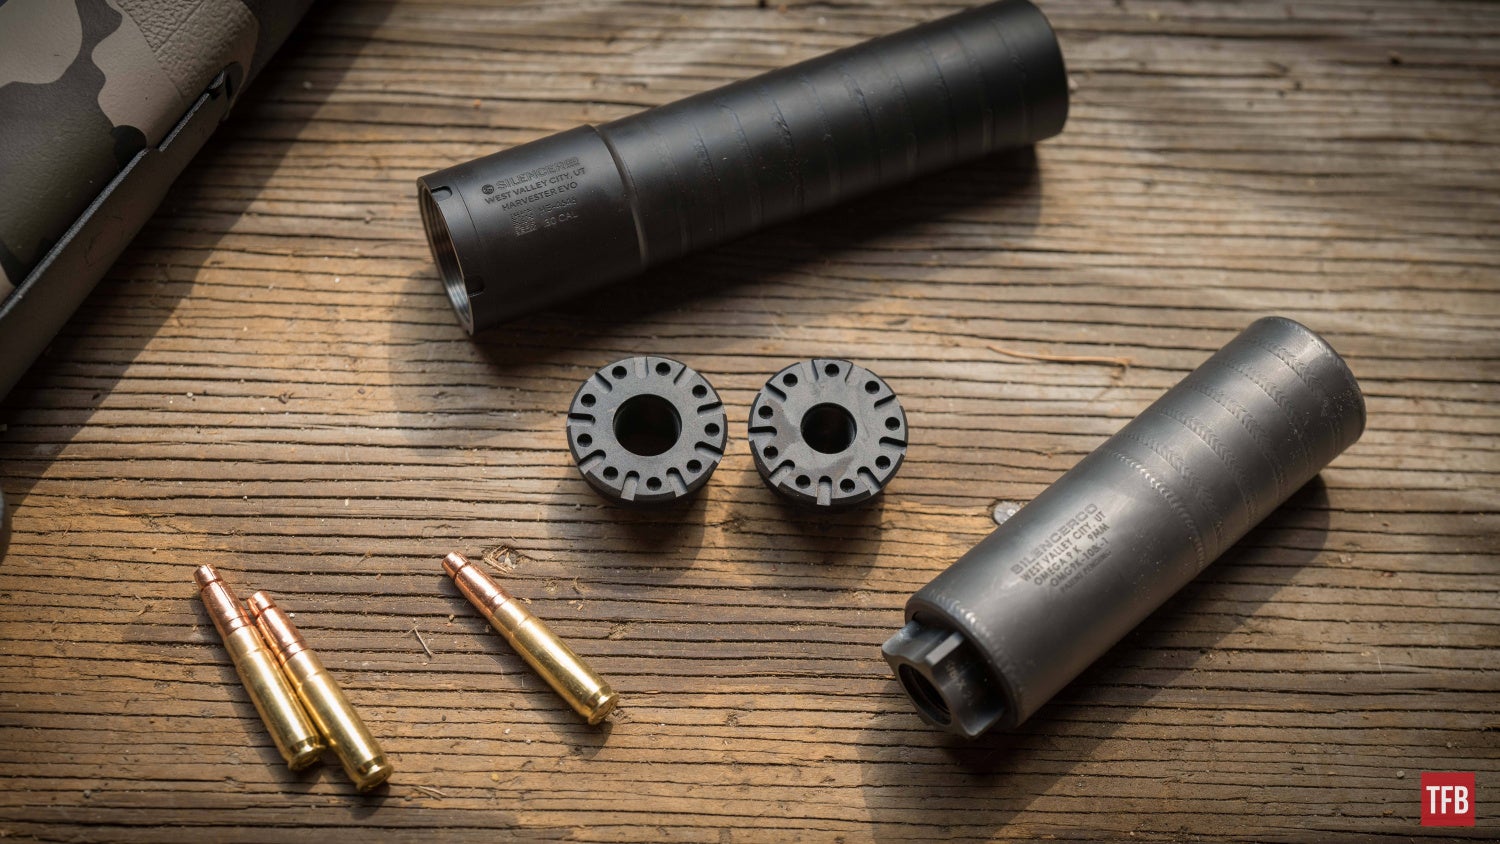 SILENCER SATURDAY #241: Be Very Quiet, We’re Hunting With the SilencerCo Harvester EVO